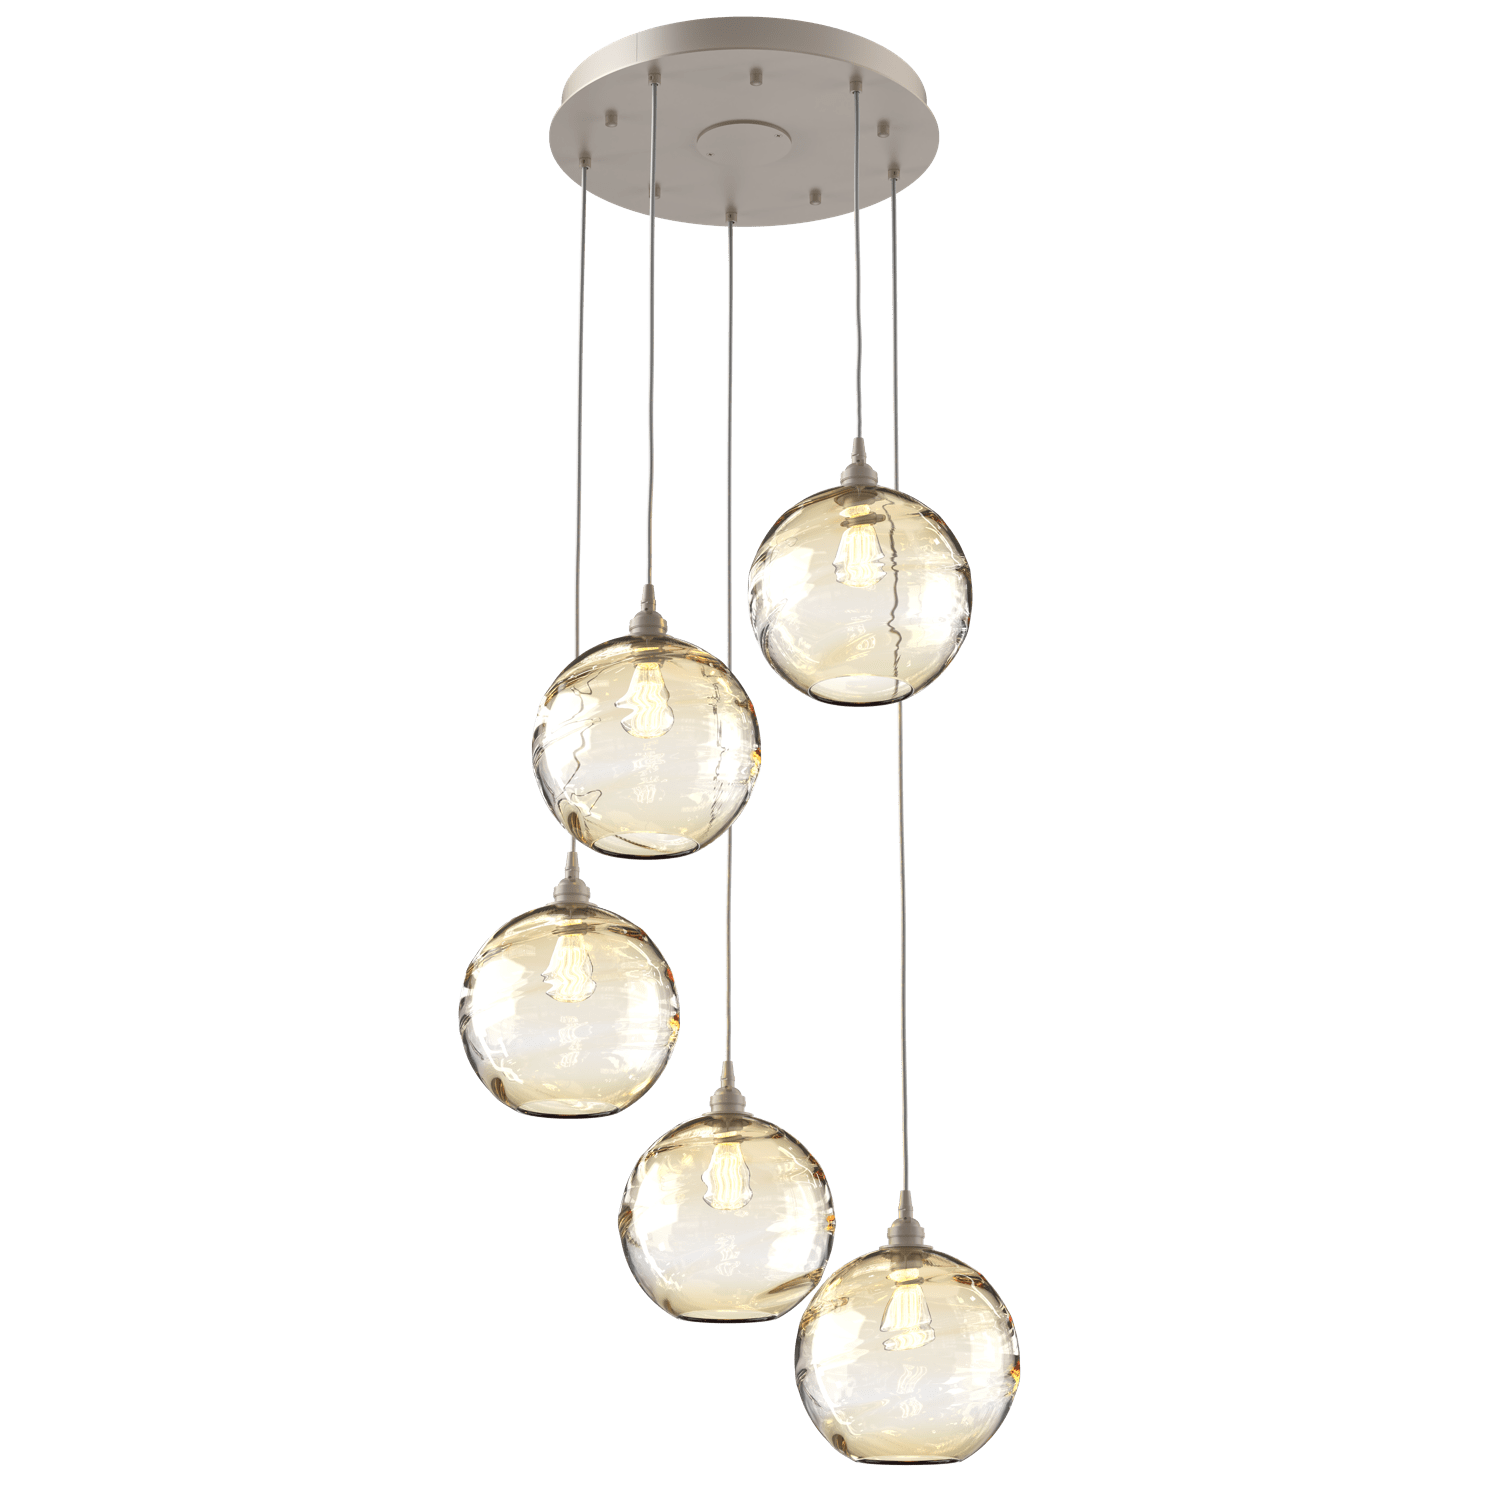 CHB0047-05-BS-OA-Hammerton-Studio-Optic-Blown-Glass-Terra-5-light-round-pendant-chandelier-with-metallic-beige-silver-finish-and-optic-amber-blown-glass-shades-and-incandescent-lamping